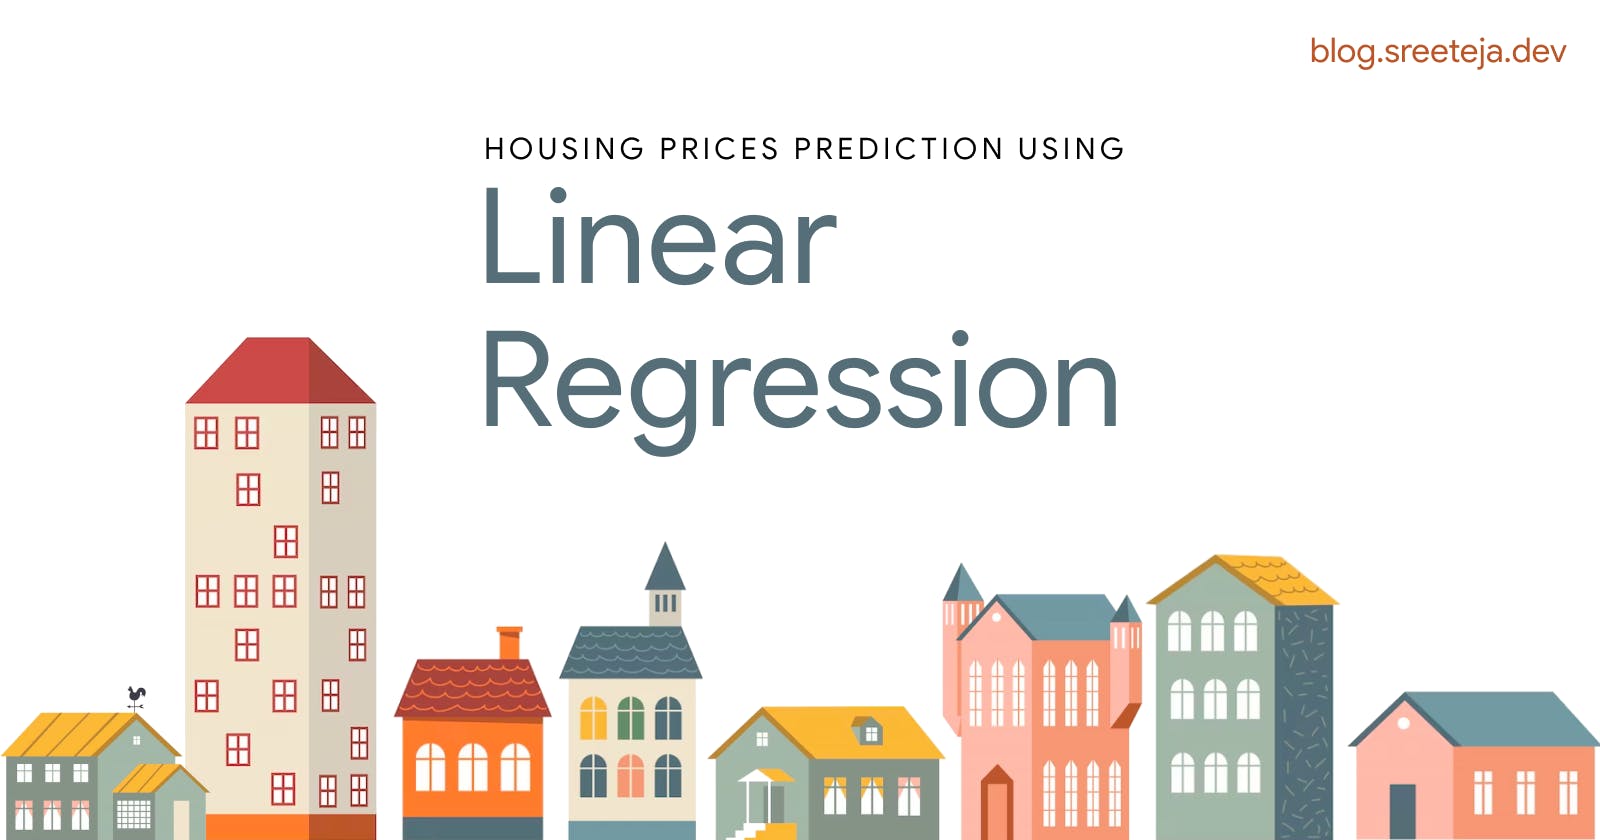 Linear Regression: Housing Prices Prediction